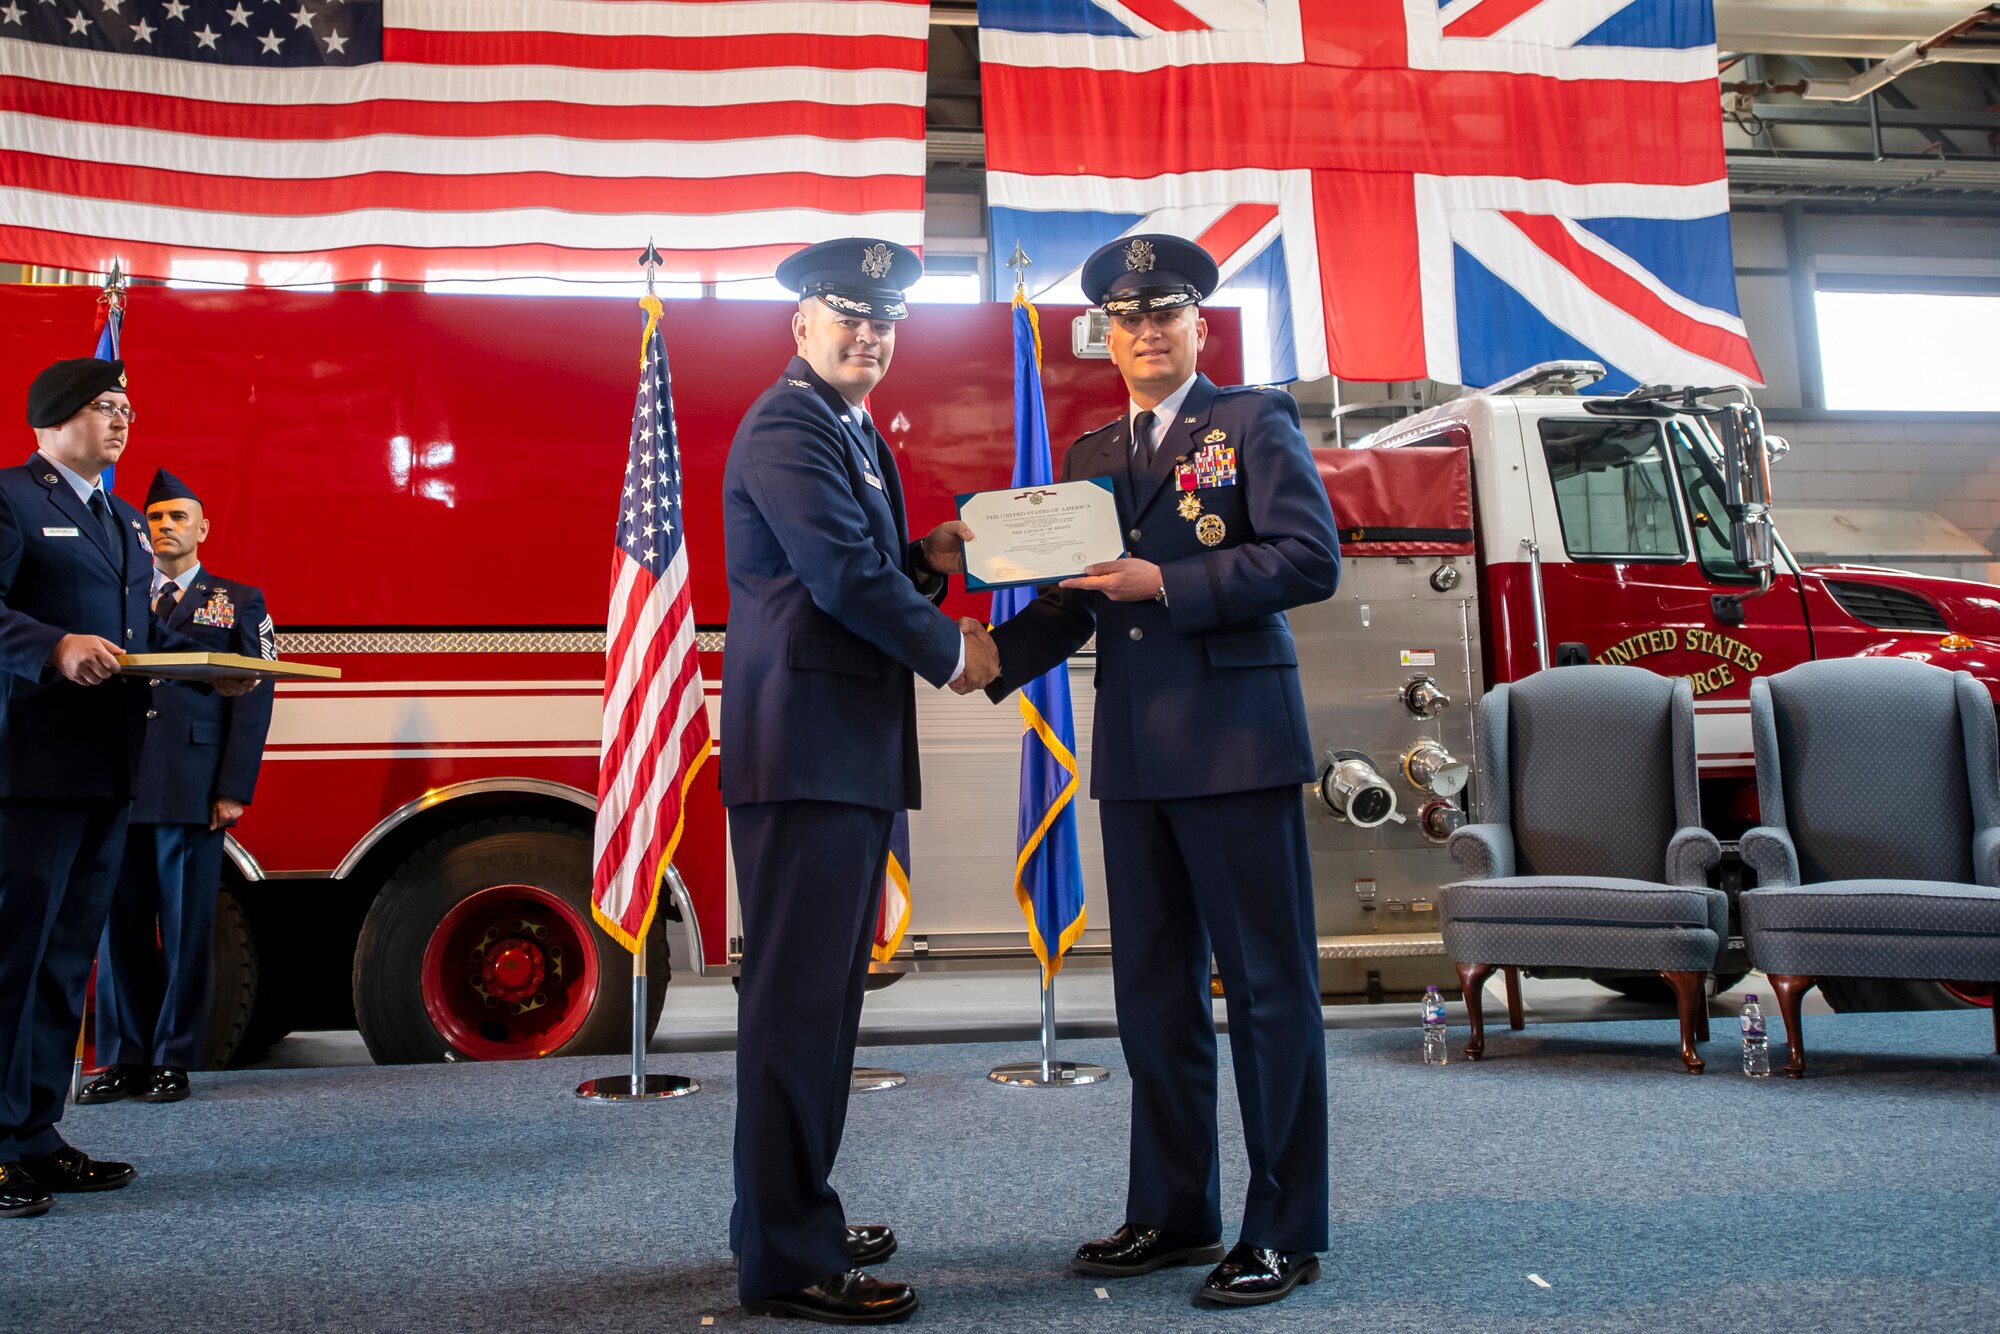 U.S. Air Force Col. Brian Filler, left, 501st Combat Support Wing commander, presents a Legion of Merit citation to Col. Richard Martin, 423d Air Base Group outgoing commander, during a change of command ceremony at RAF Alconbury, England, July 25, 2022. During his command, Martin led a unit that provided a full range of operational, logistical, engineering, medical and communications support and community services to 6,500 military and civilian personnel and families at 4 installations. (U.S. Air Force photo by Staff Sgt. Eugene Oliver)